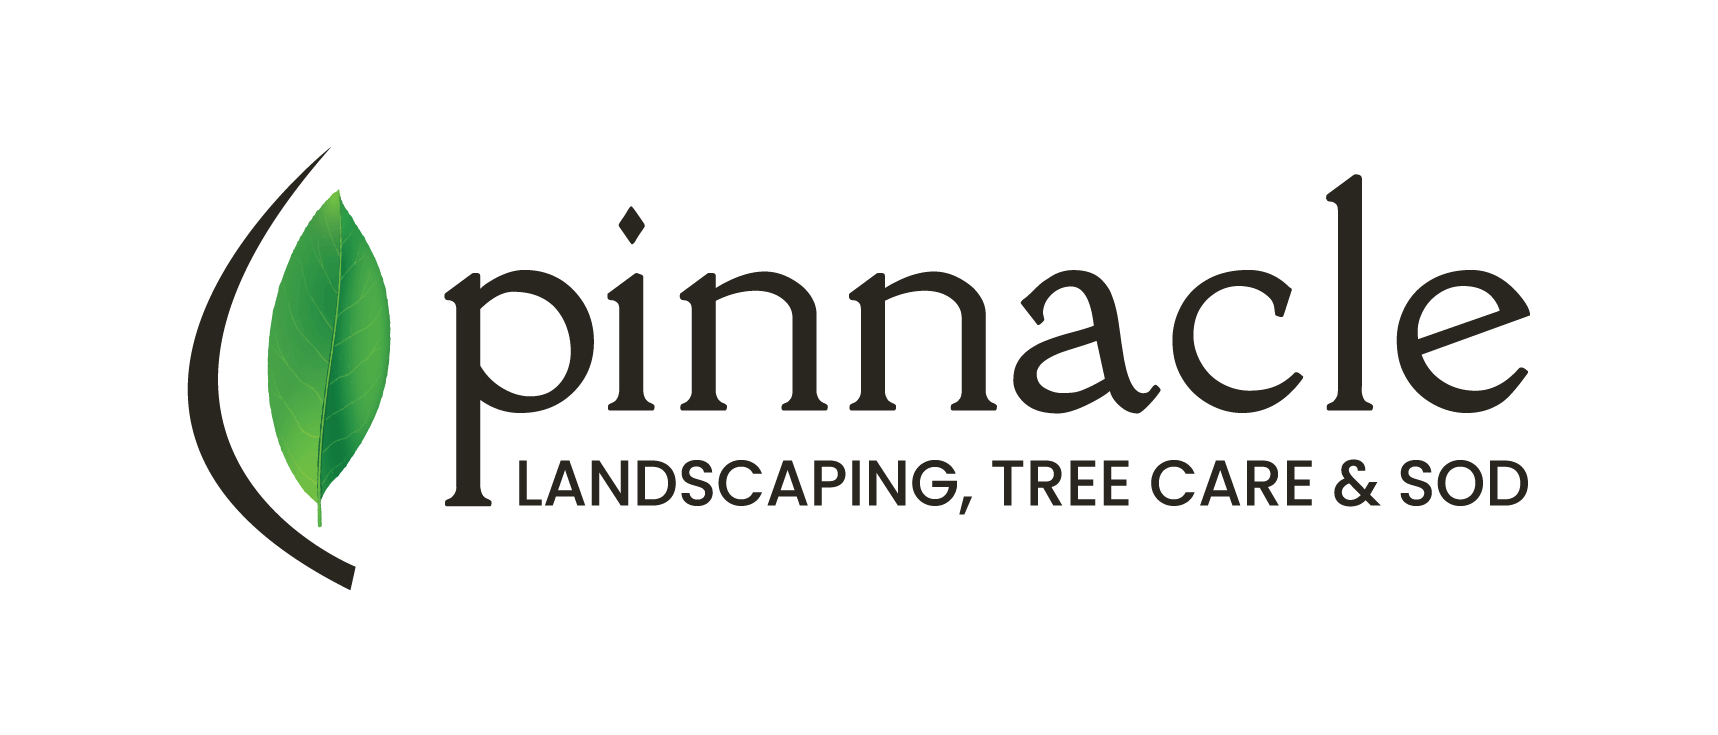 Pinnacle Landscaping, Tree Care, and Sod Brand Logo